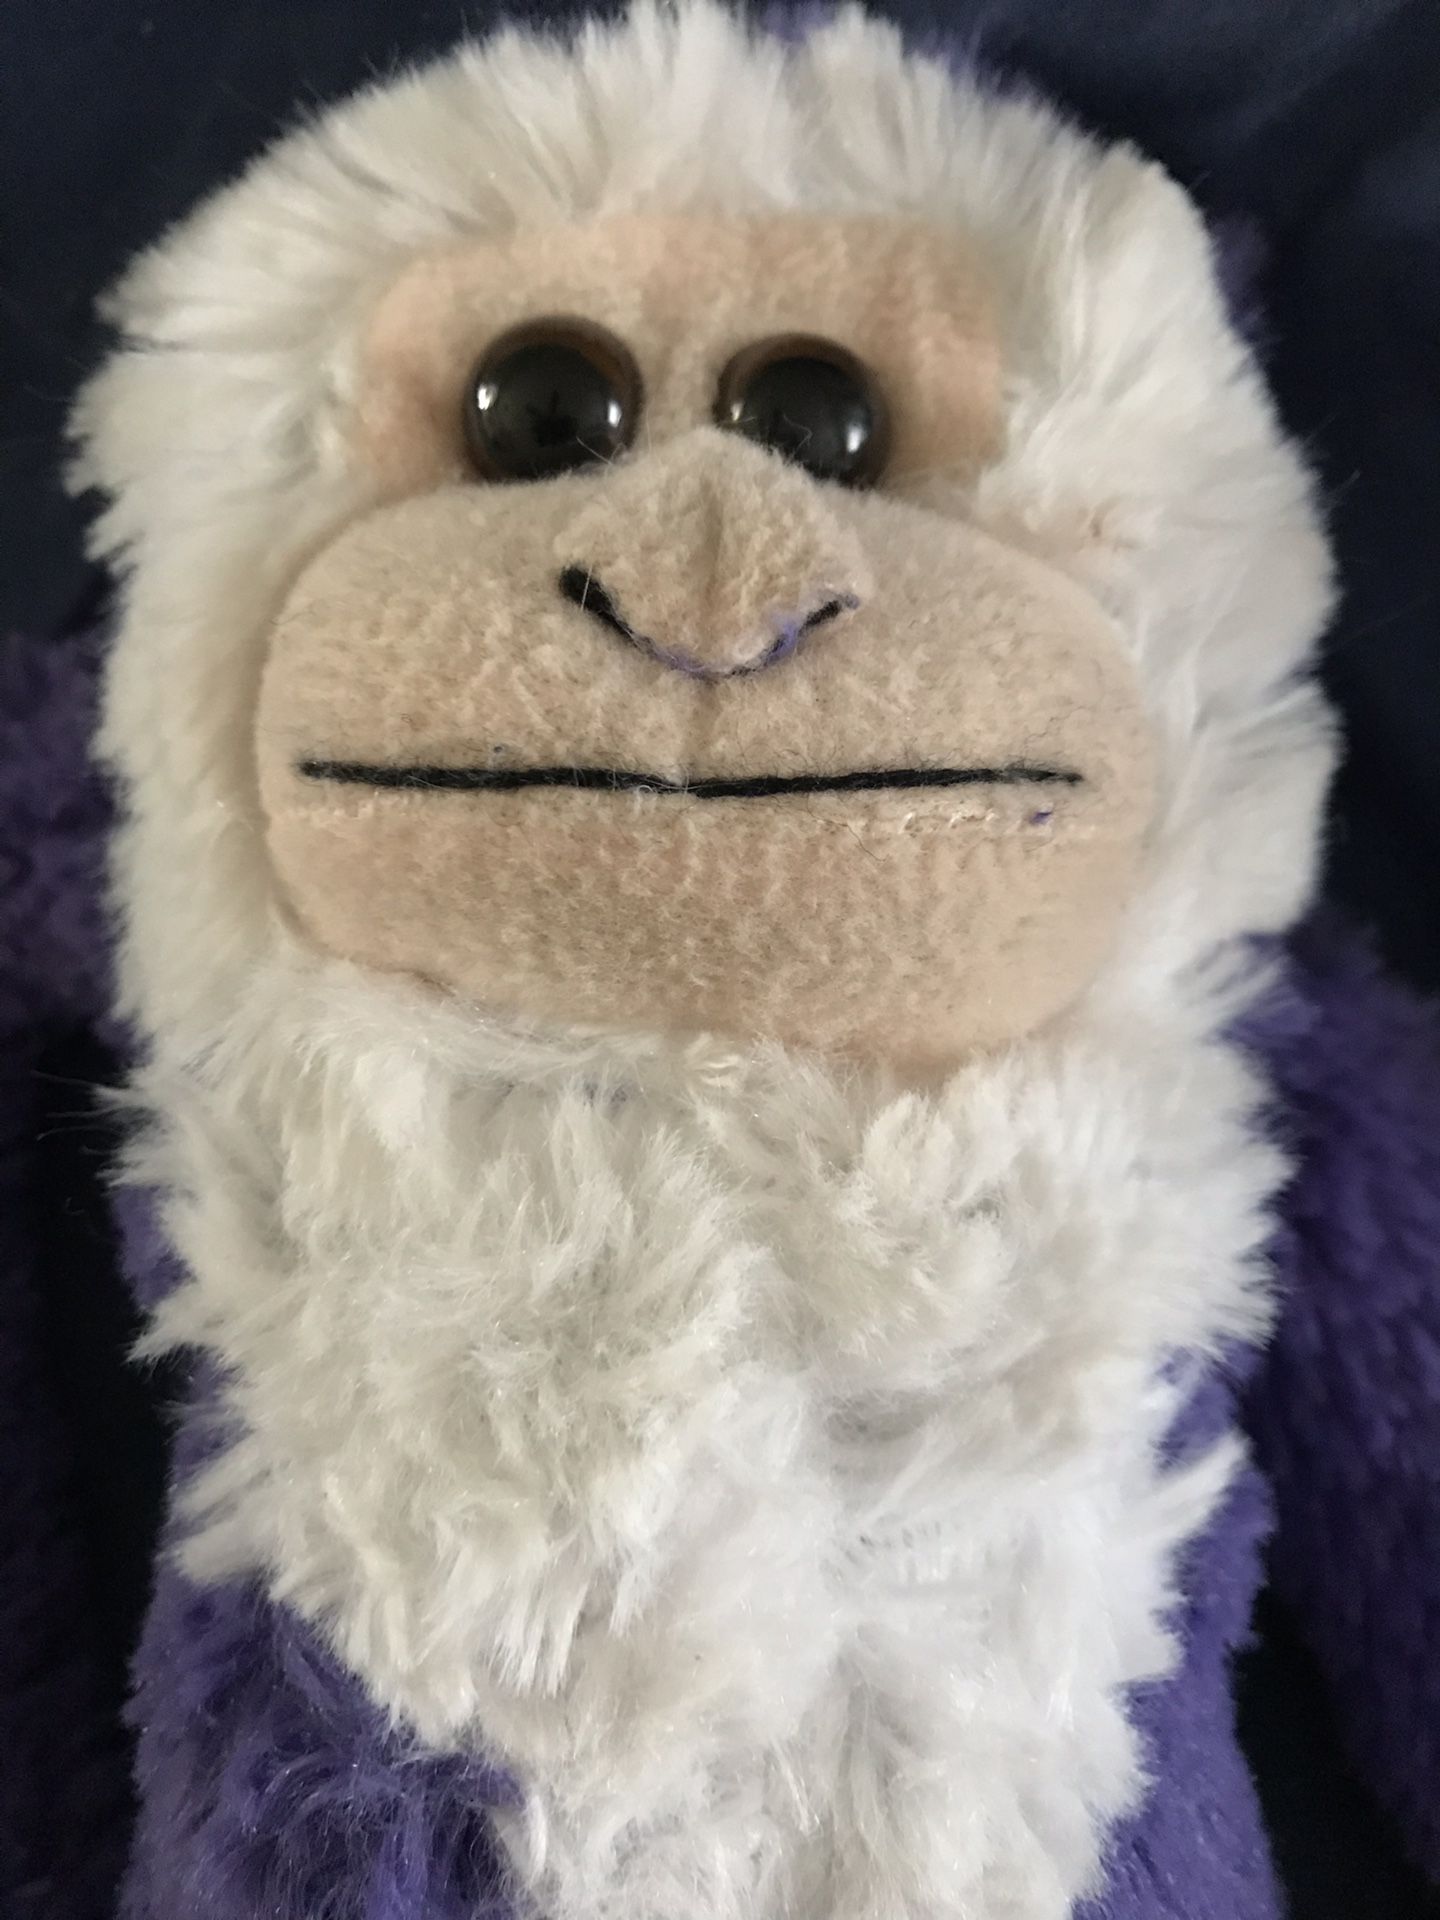 Soft and sweet monkey with Velcro legs